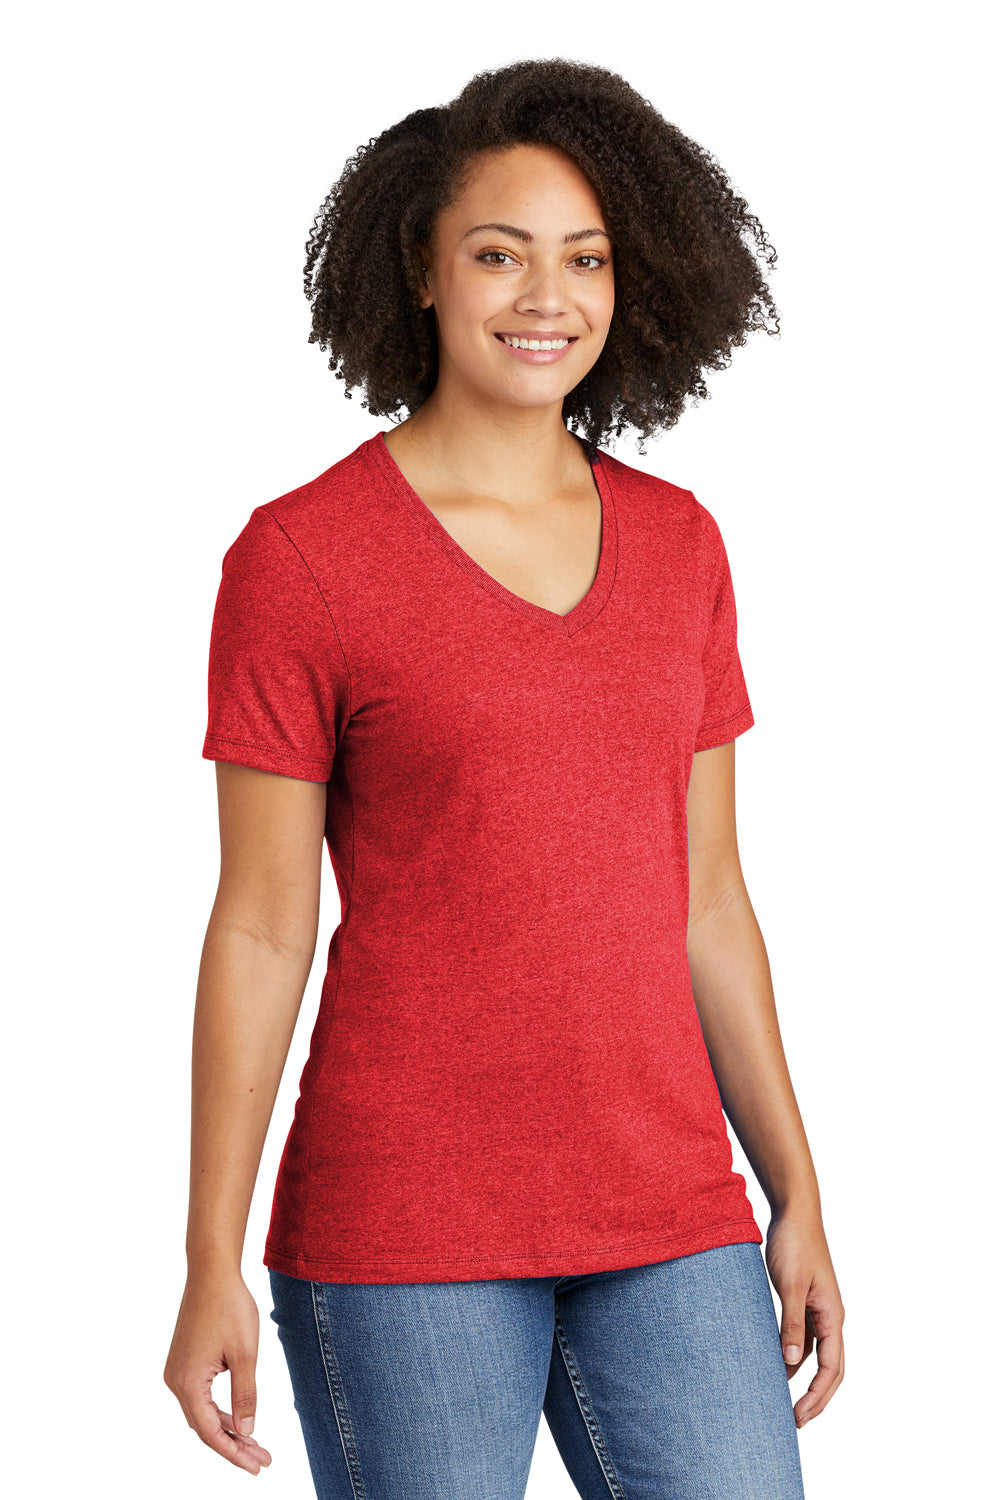 Allmade AL2303 Womens Recycled Short Sleeve V-Neck T-Shirt Heather Red Model 3Q